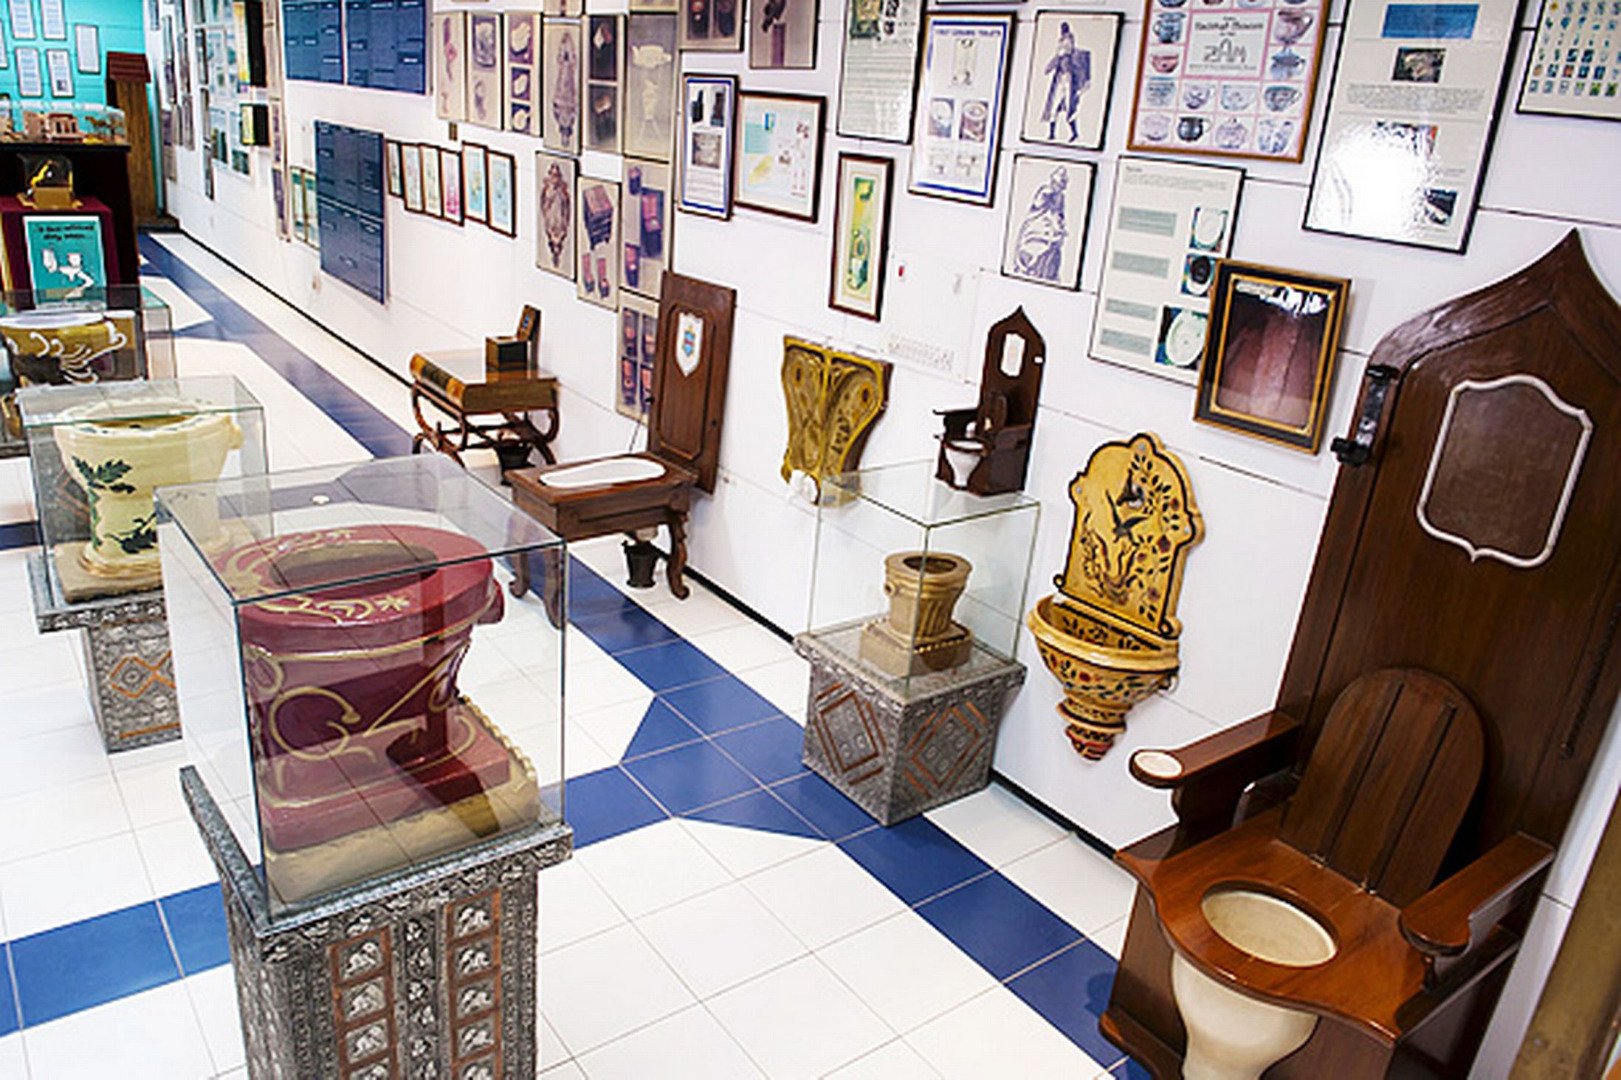 Sulabh International Toilet Museum  is a facility that houses different types of toilets used throughout history.